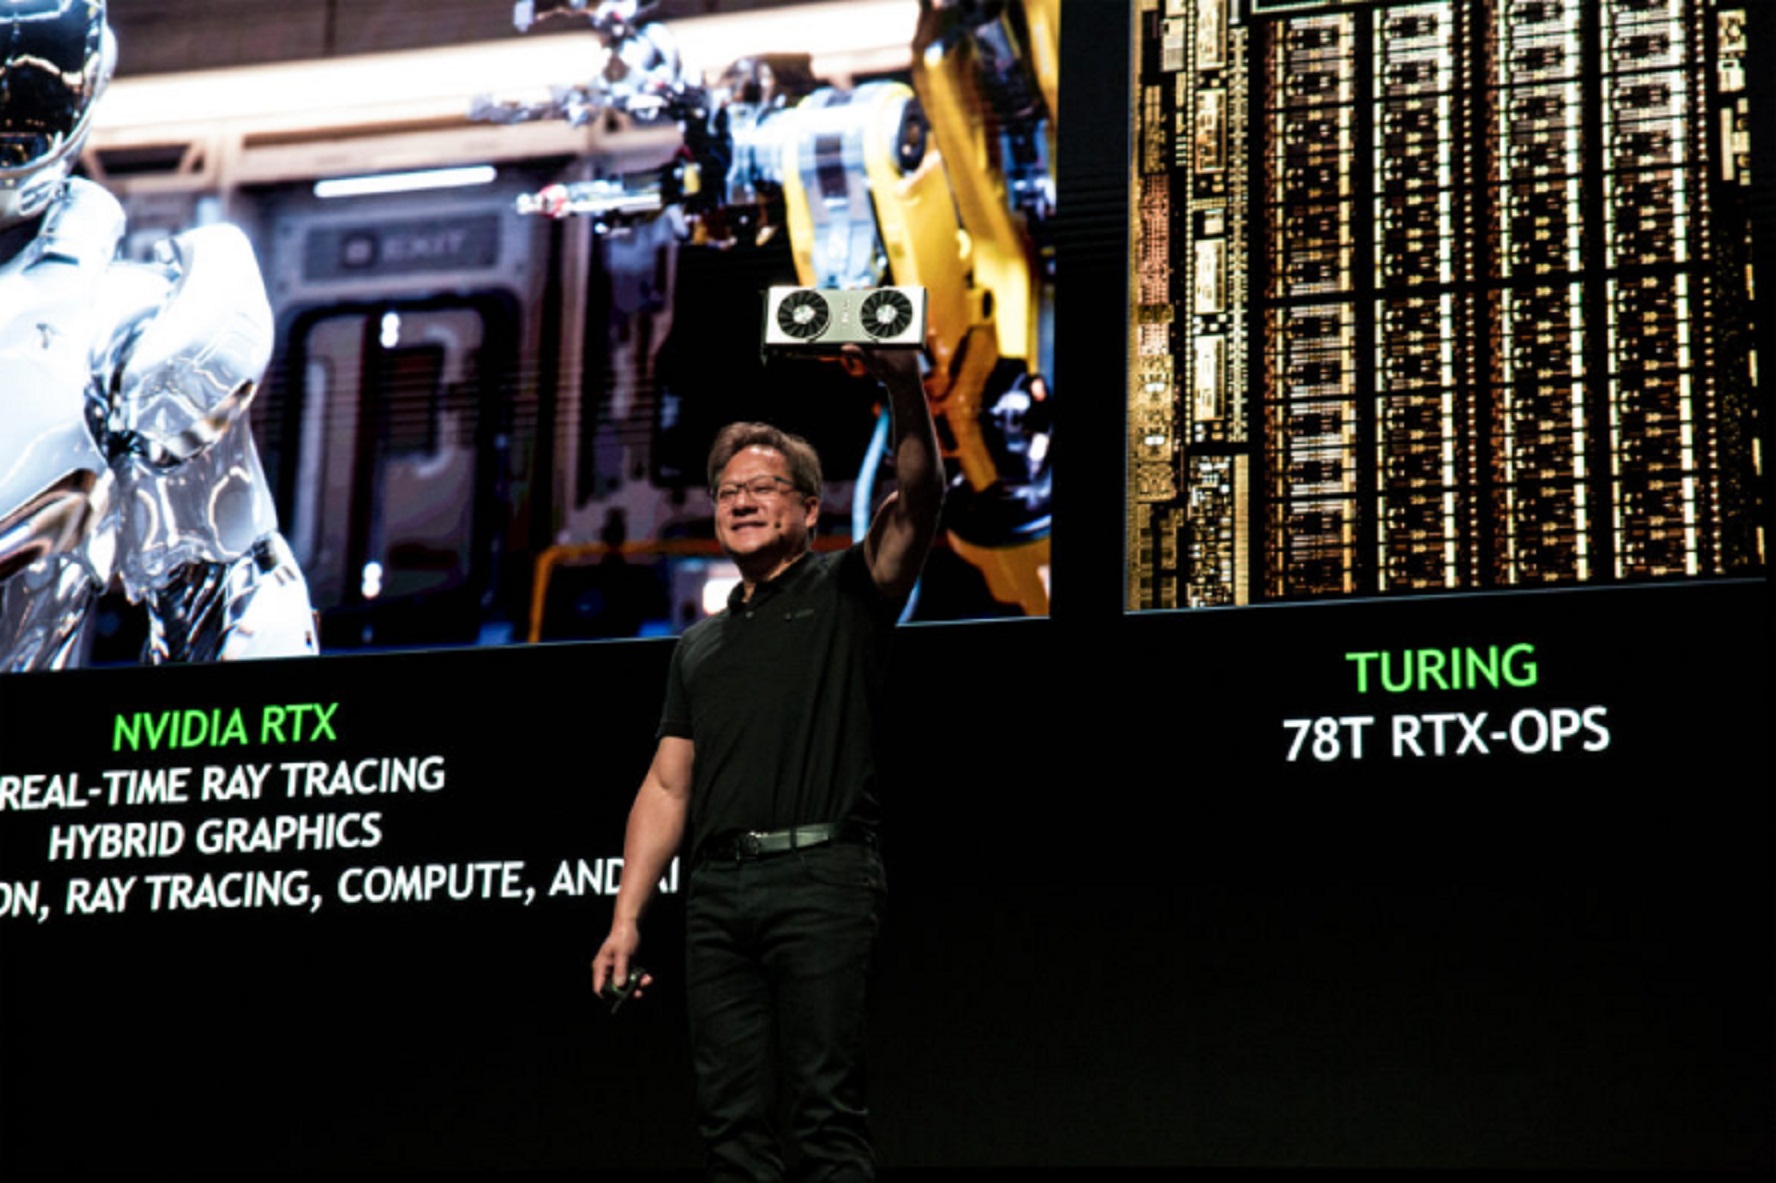 Owners Of Nvidia’s New 3080 GPU Have Claimed Driver Issues Are Rendering Games Unplayable